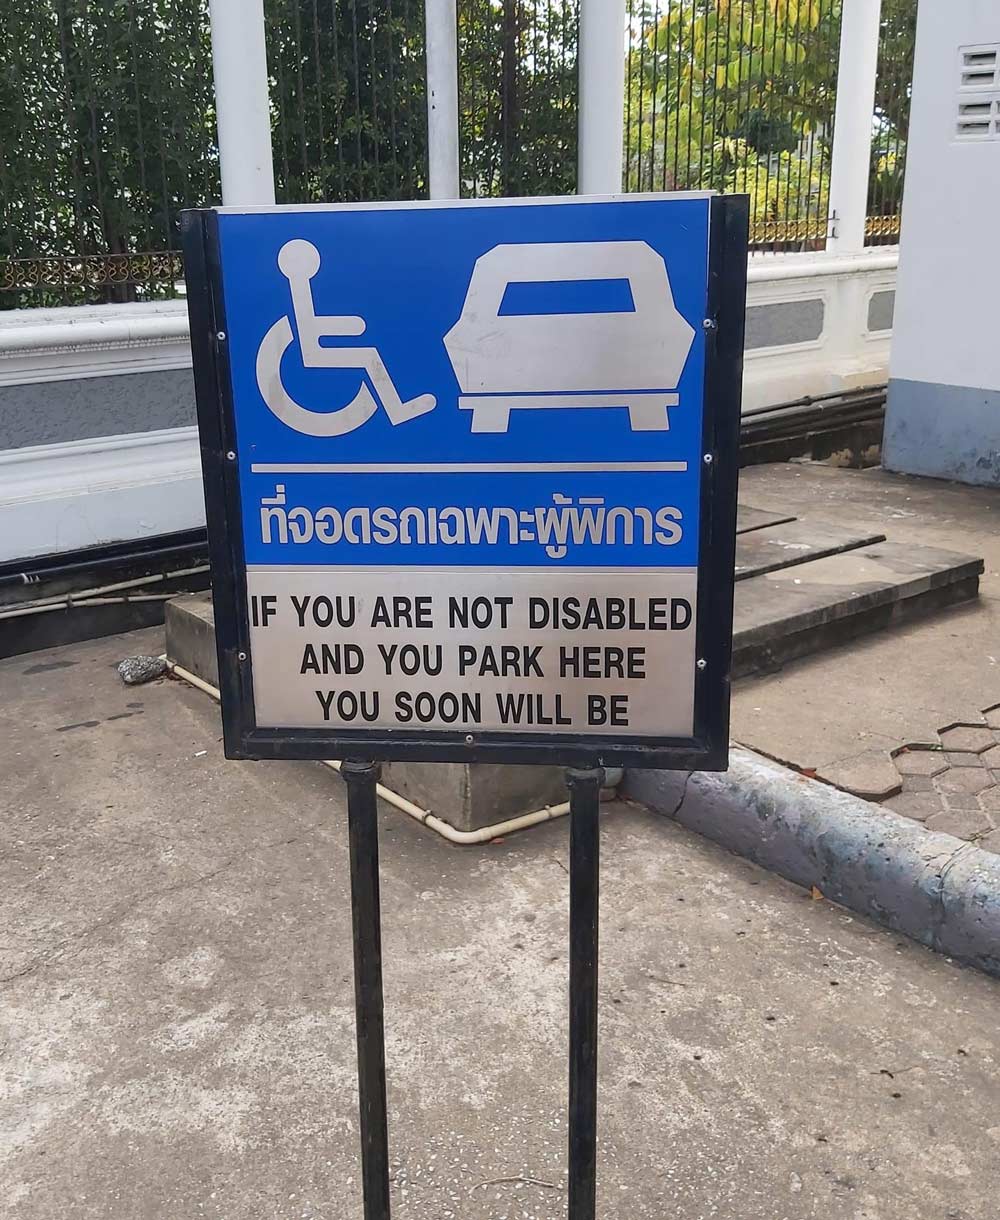 This parking spot in Thailand